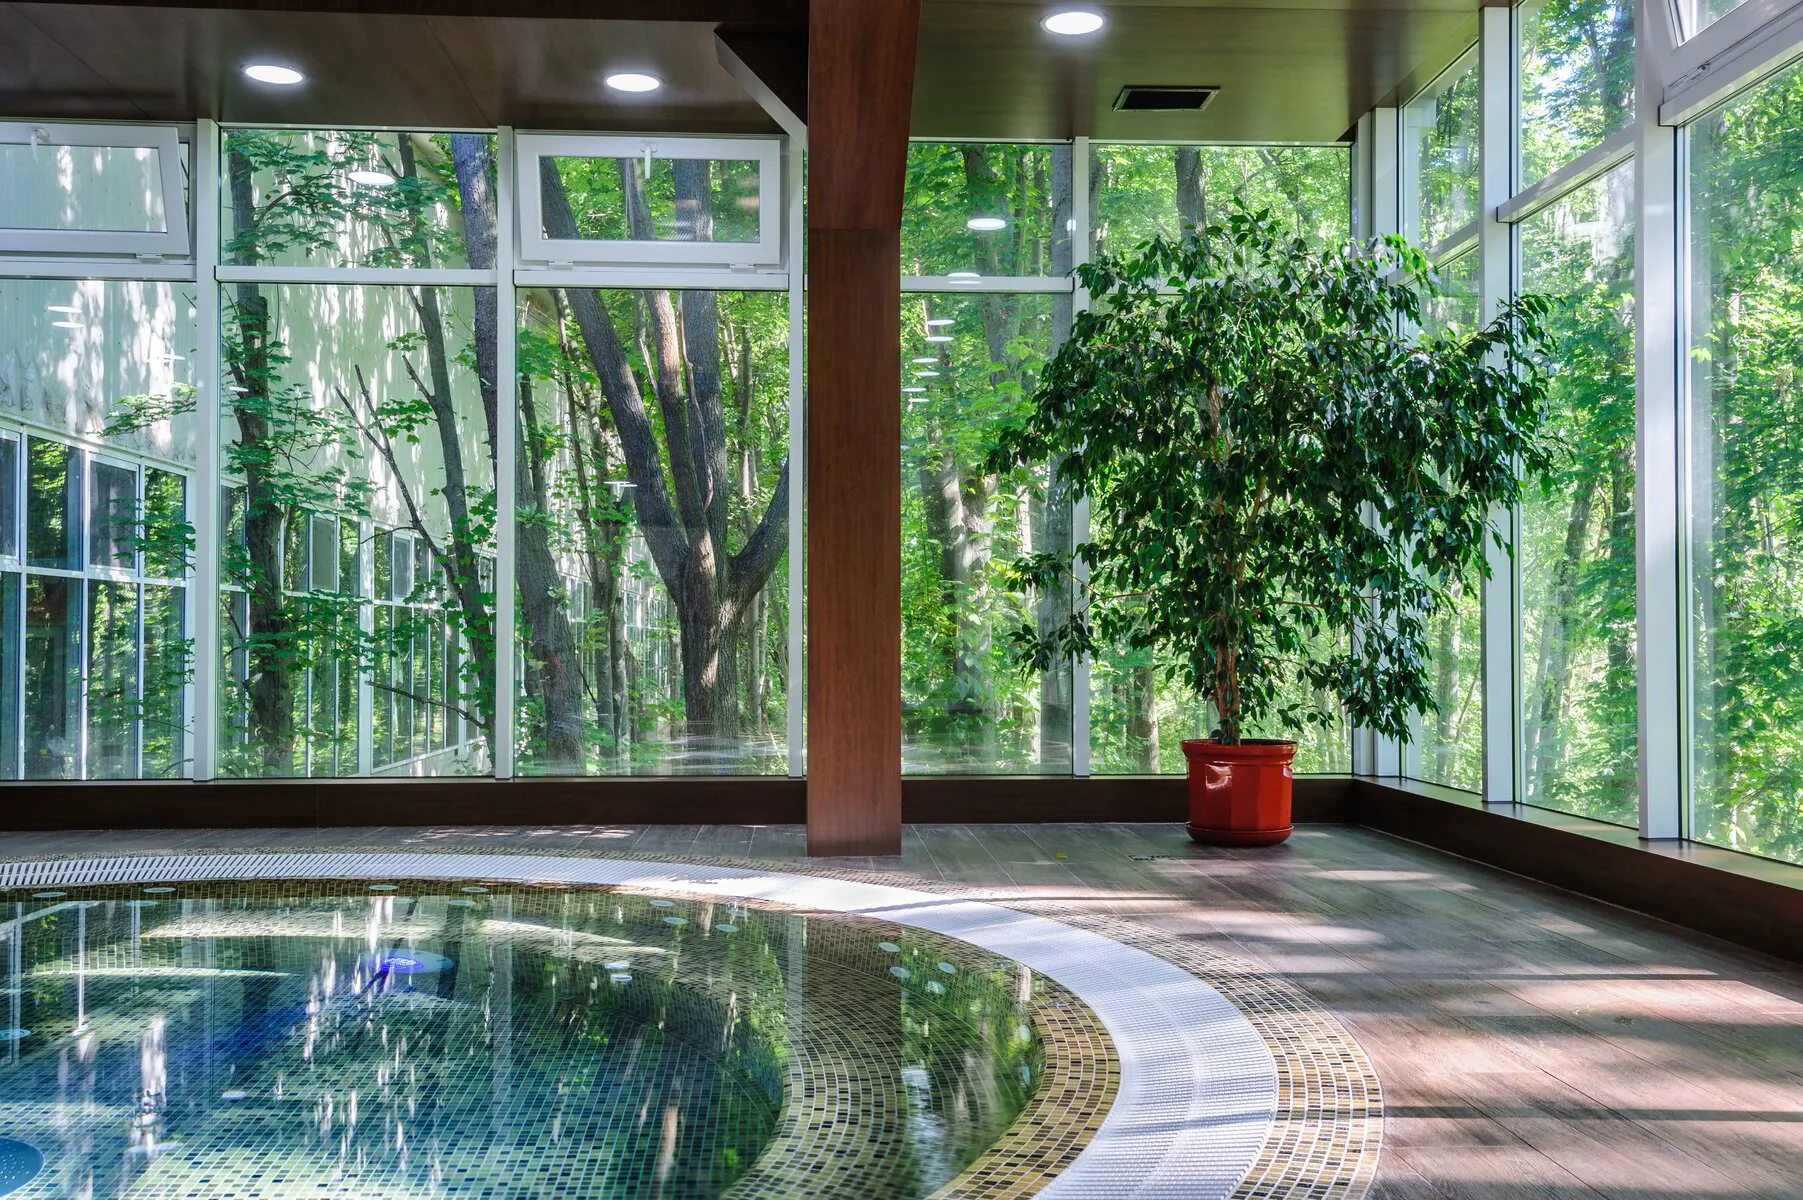 Living Pools & Spas. Luxury indoor pool with potted plant and large glass windows surrounded by trees outside